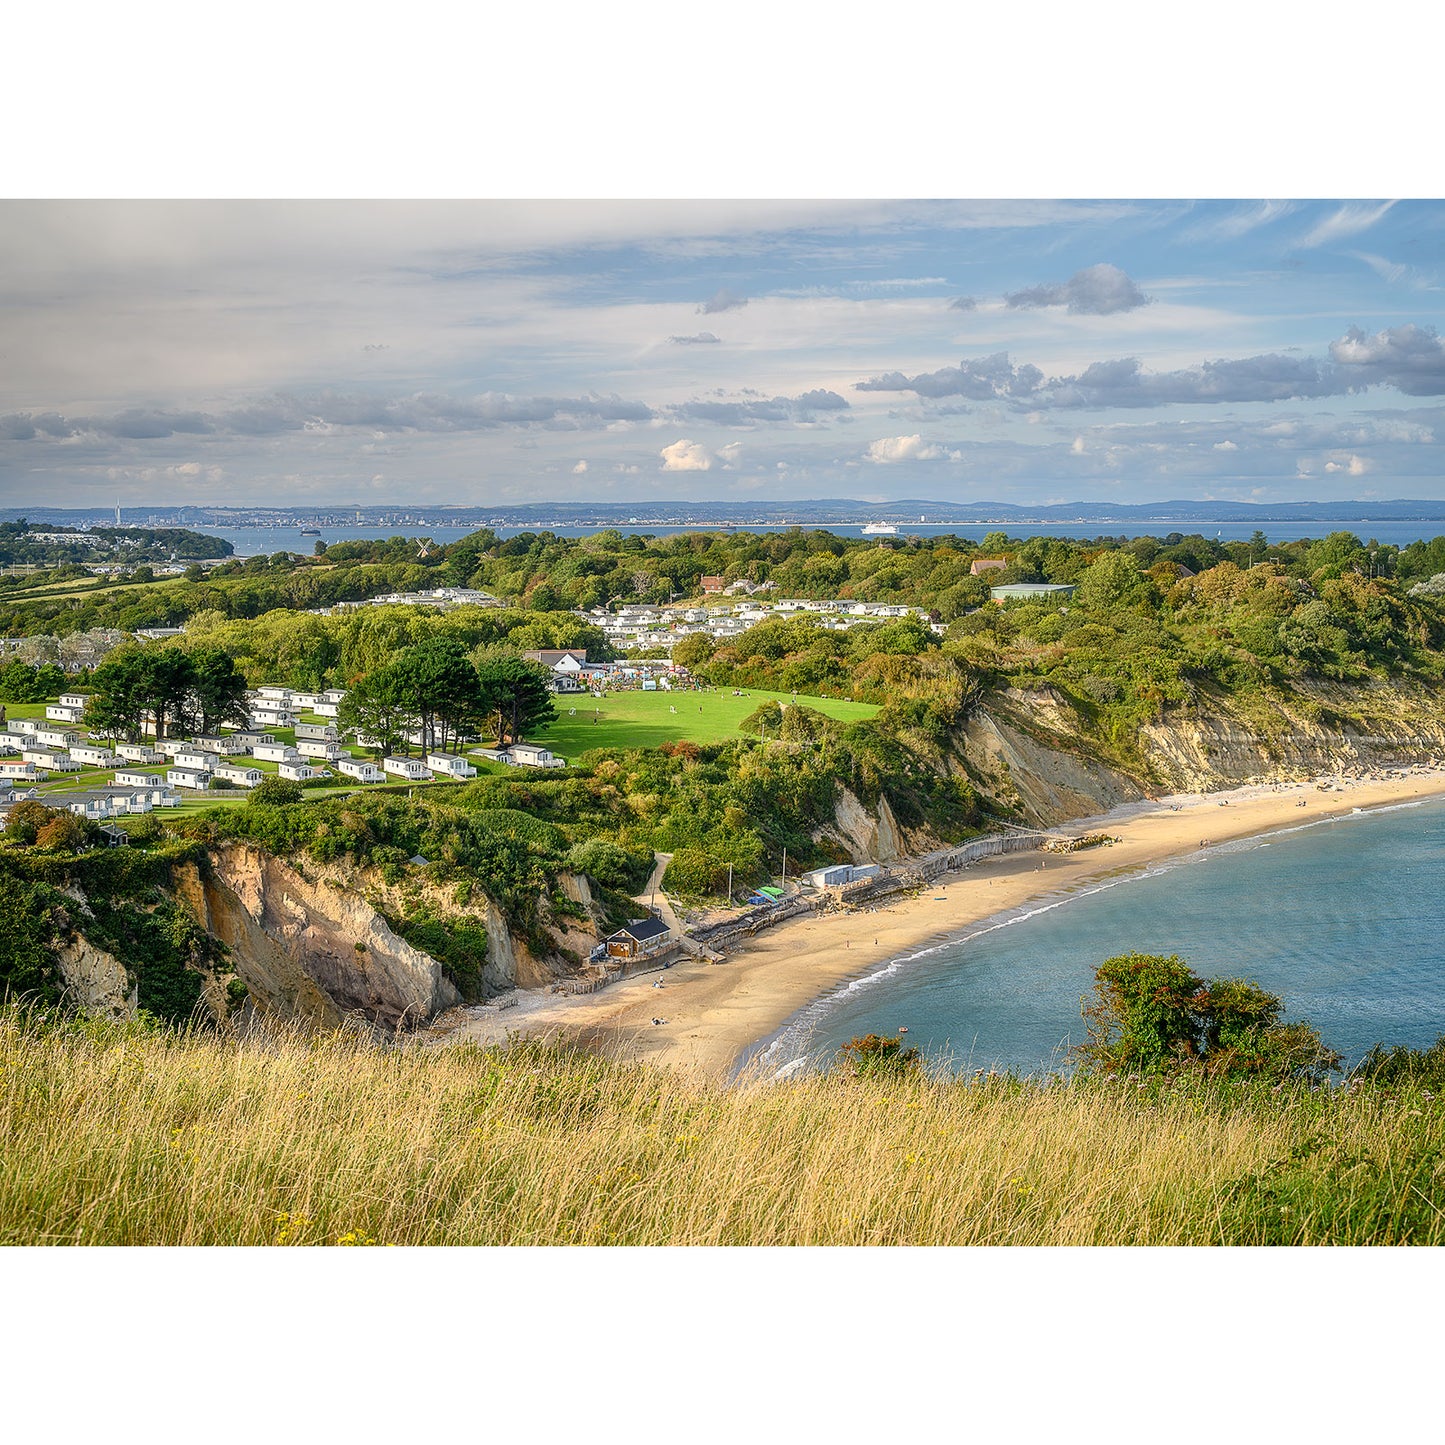 Coastal landscape featuring Whitecliff Bay beach with a caravan park overlooking the sea on the Isle of Wight, captured by Available Light Photography.